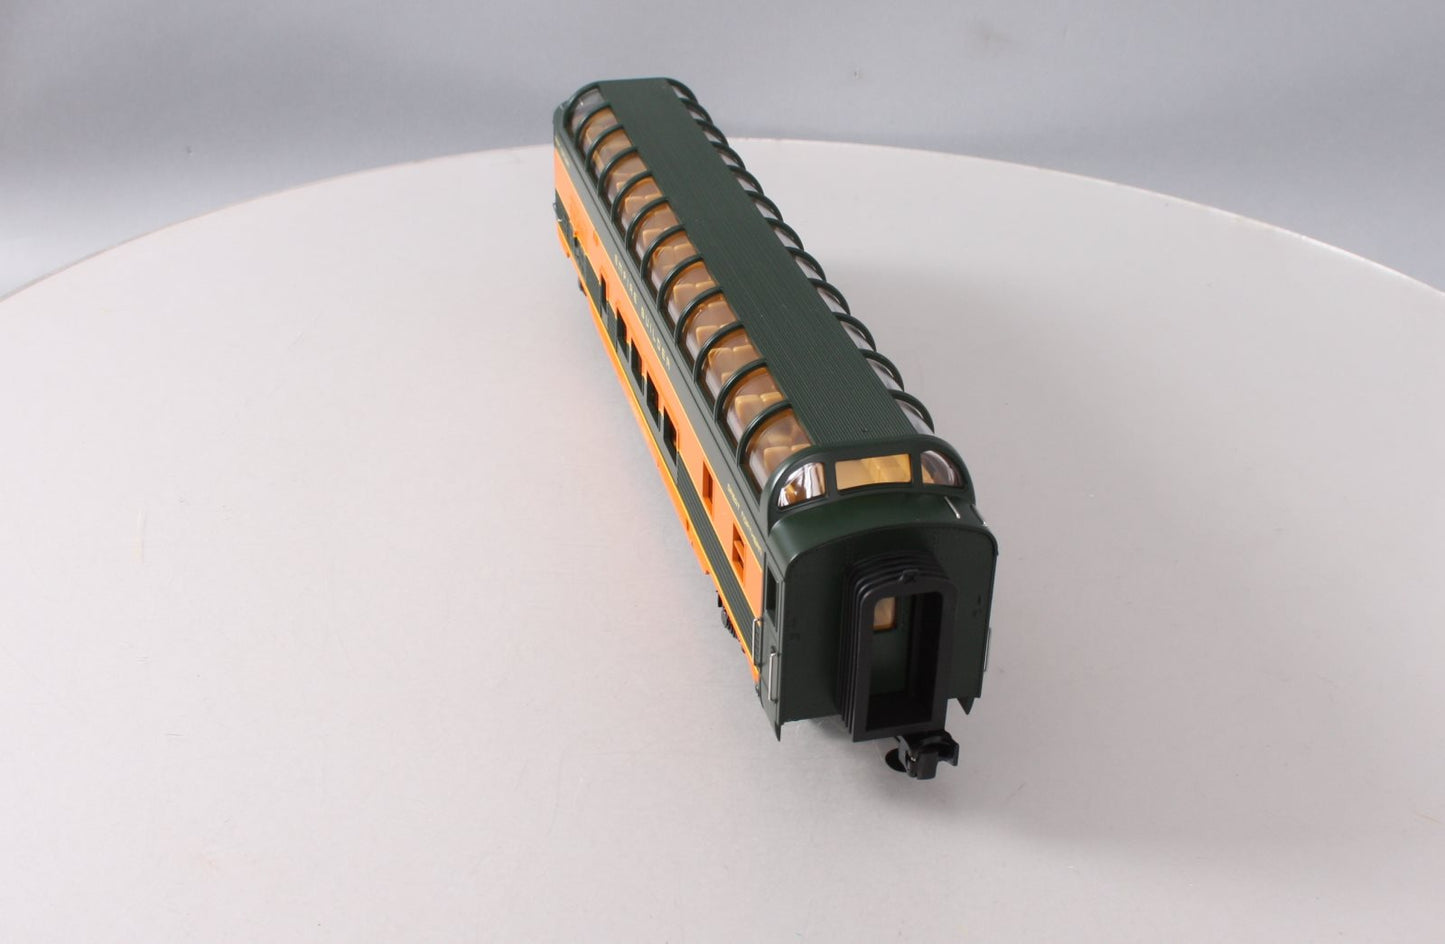 MTH 30-67533 Great Northern 60' Streamlined Full-Length Vista Dome Car